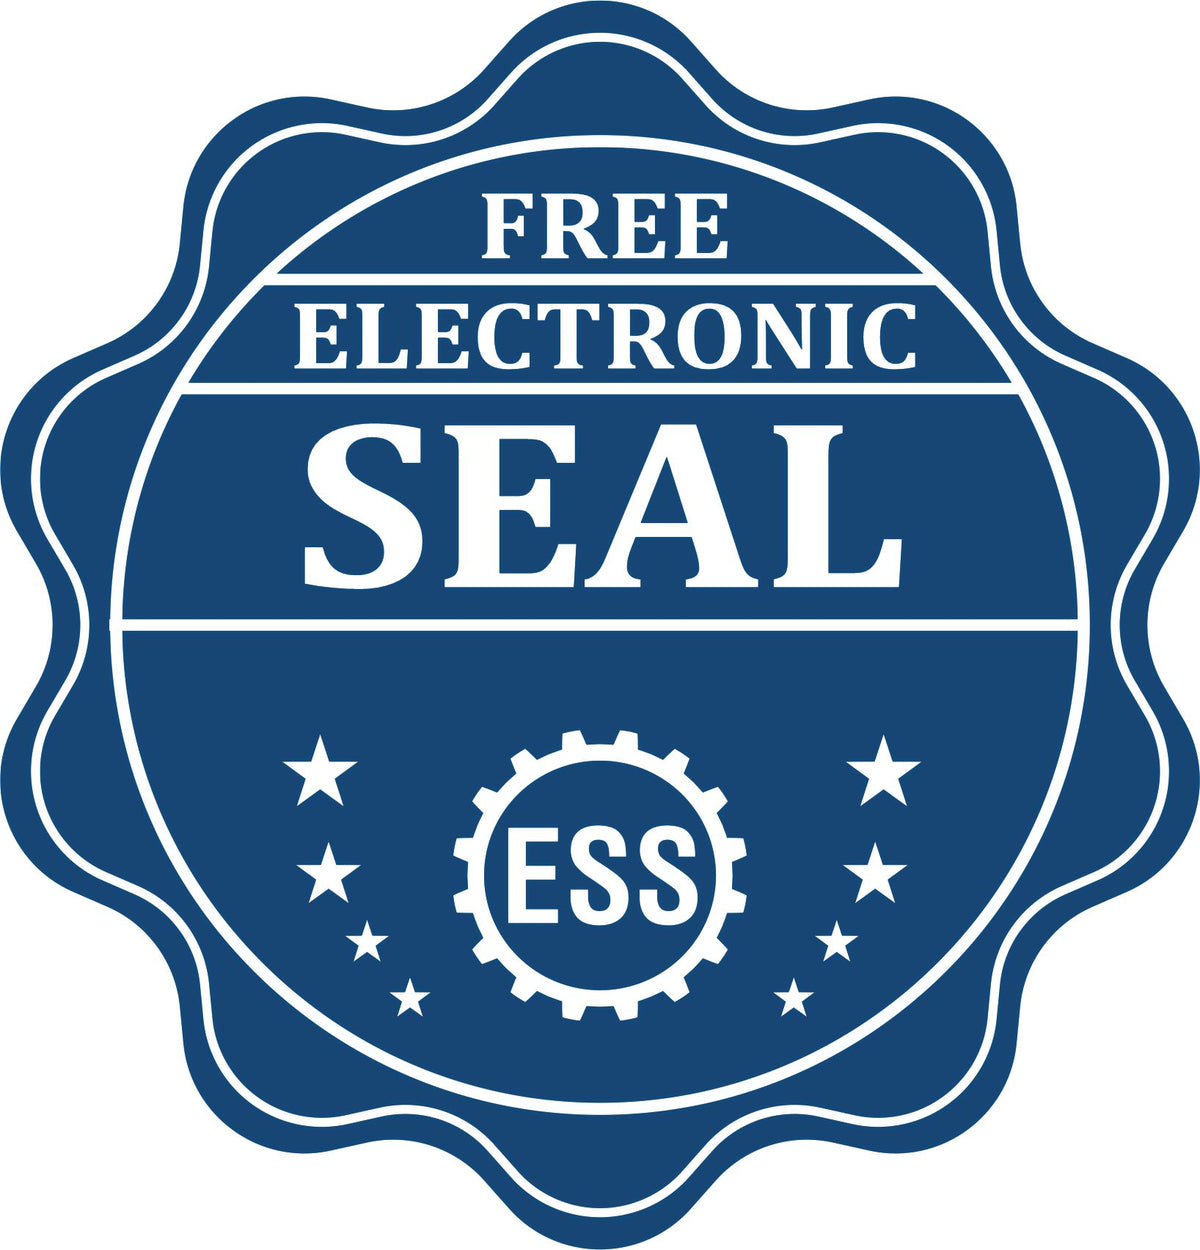 A badge showing a free electronic seal for the Heavy-Duty Connecticut Rectangular Notary Stamp with stars and the ESS gear on the emblem.